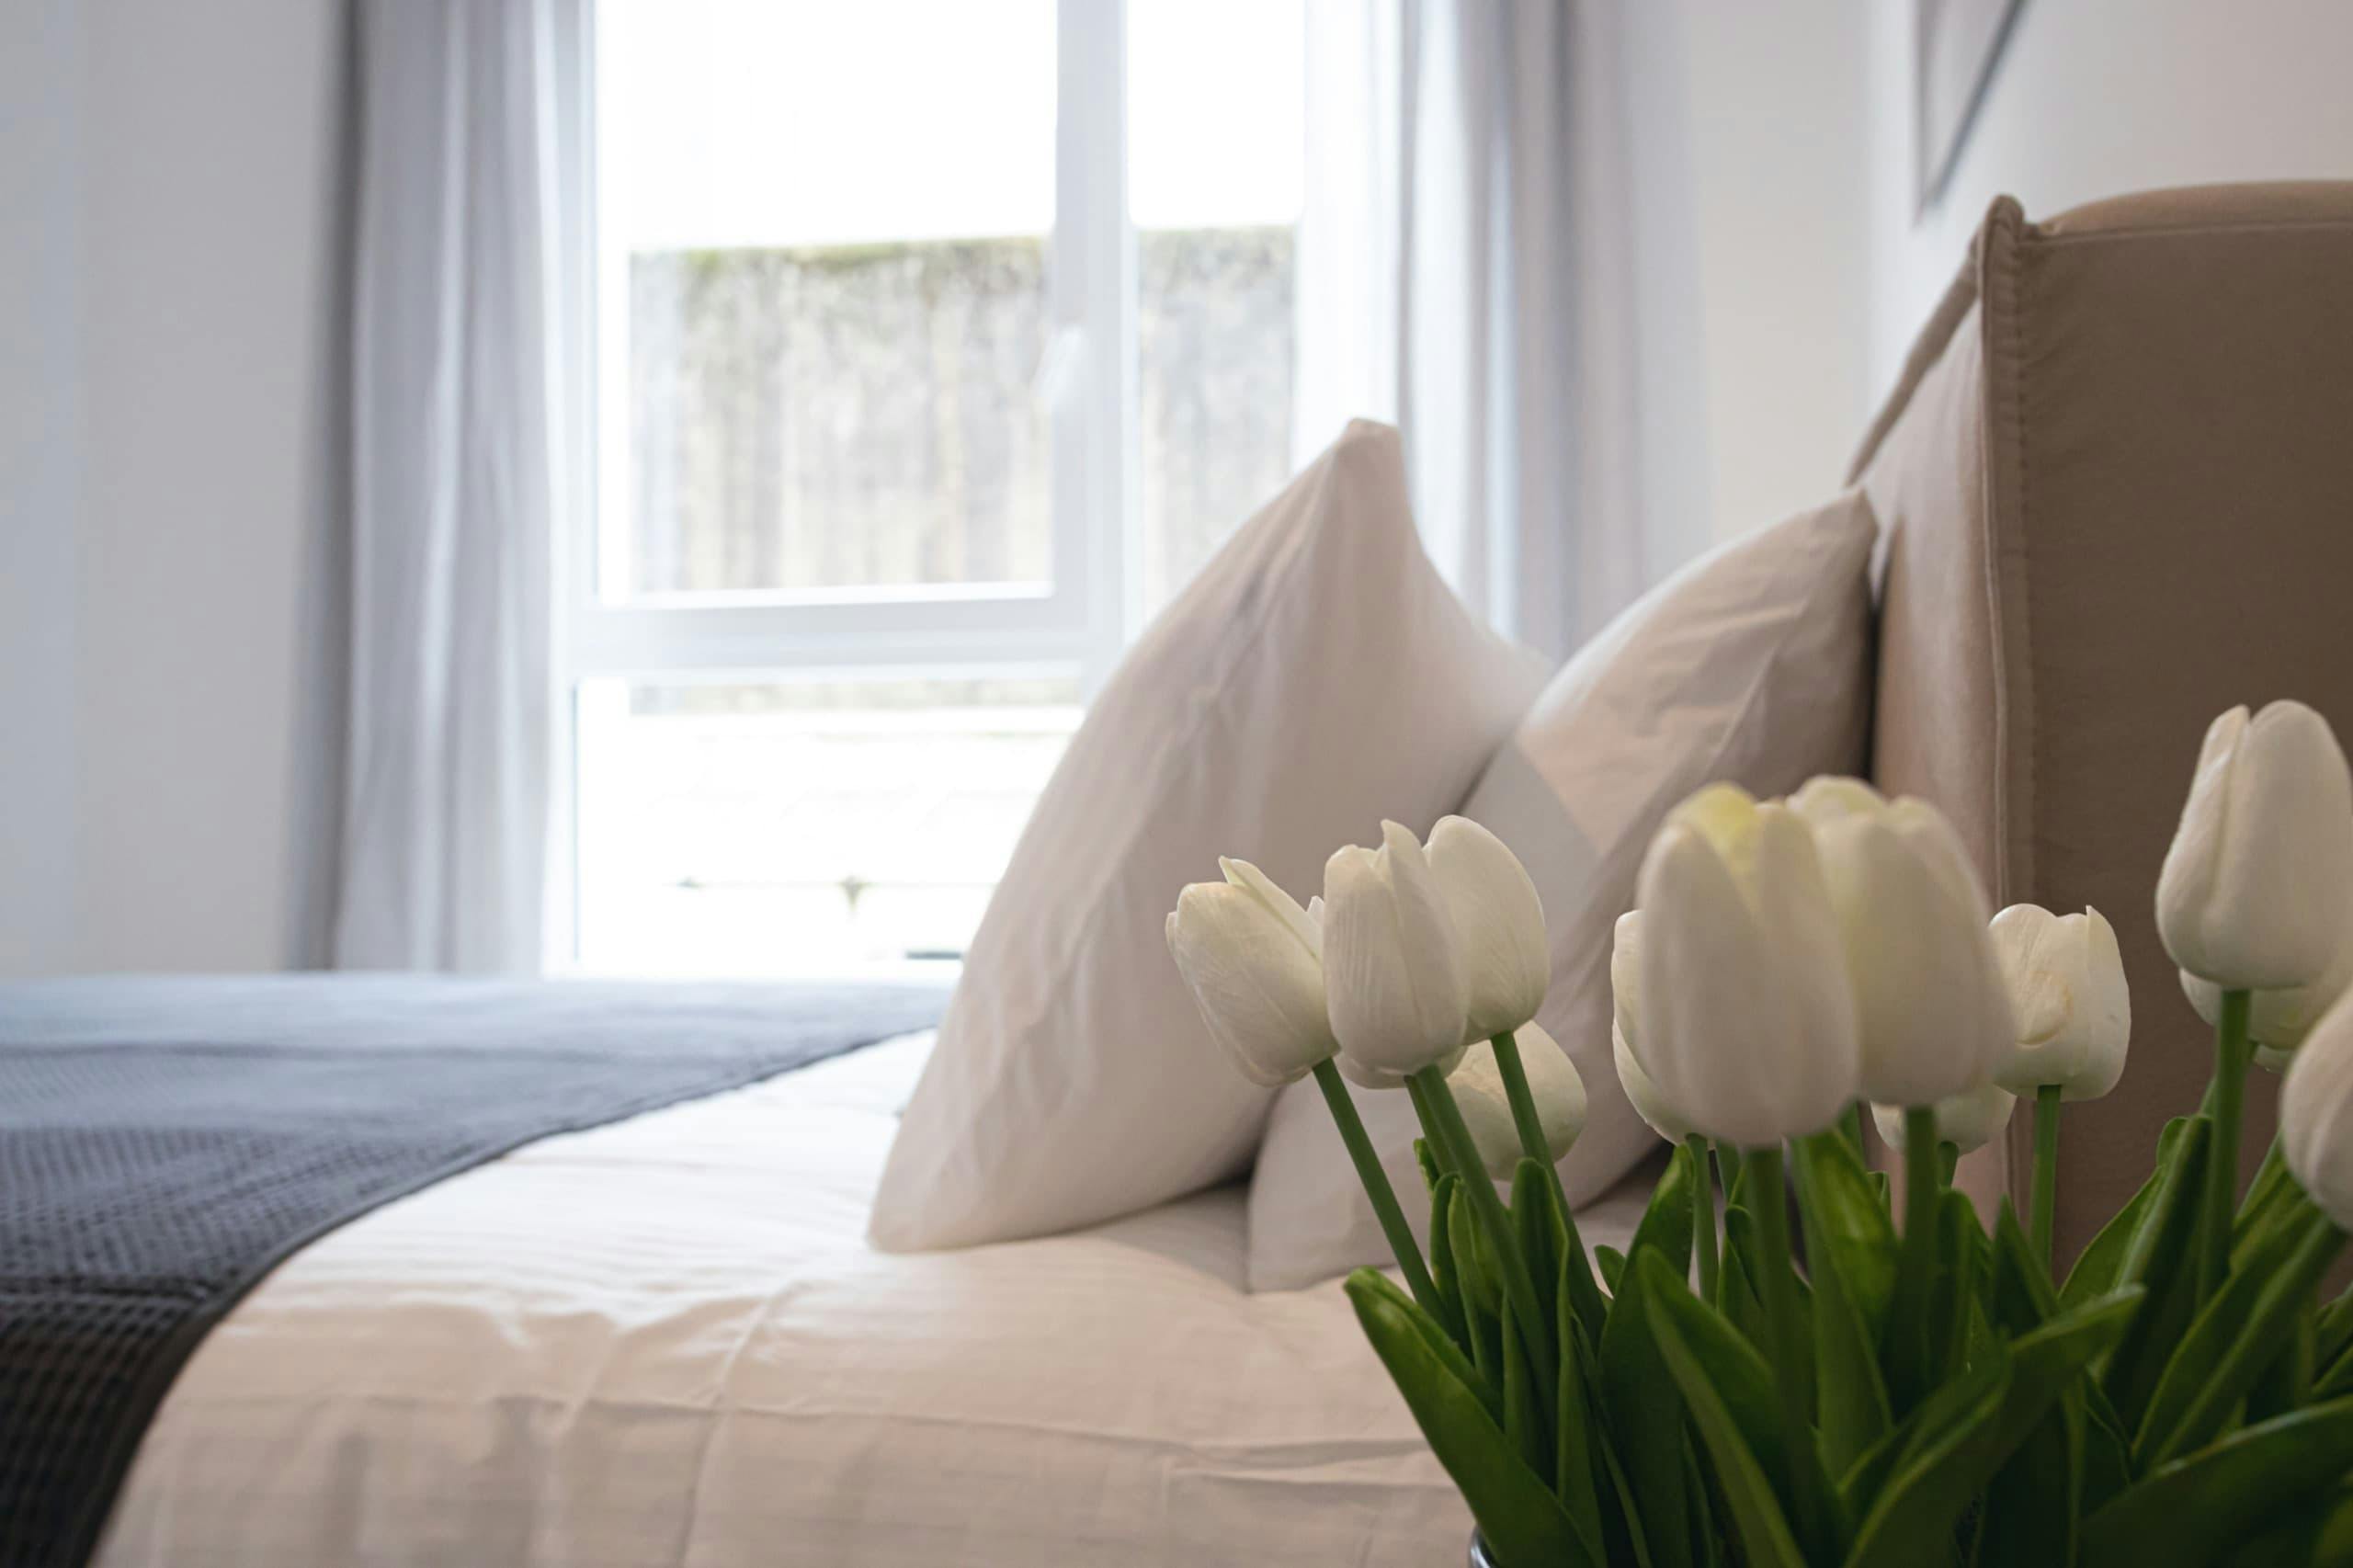 Close-up image with the bed, fluffy white pillows, and white tulips in a vase on a nightstand. Light comes through the big window.